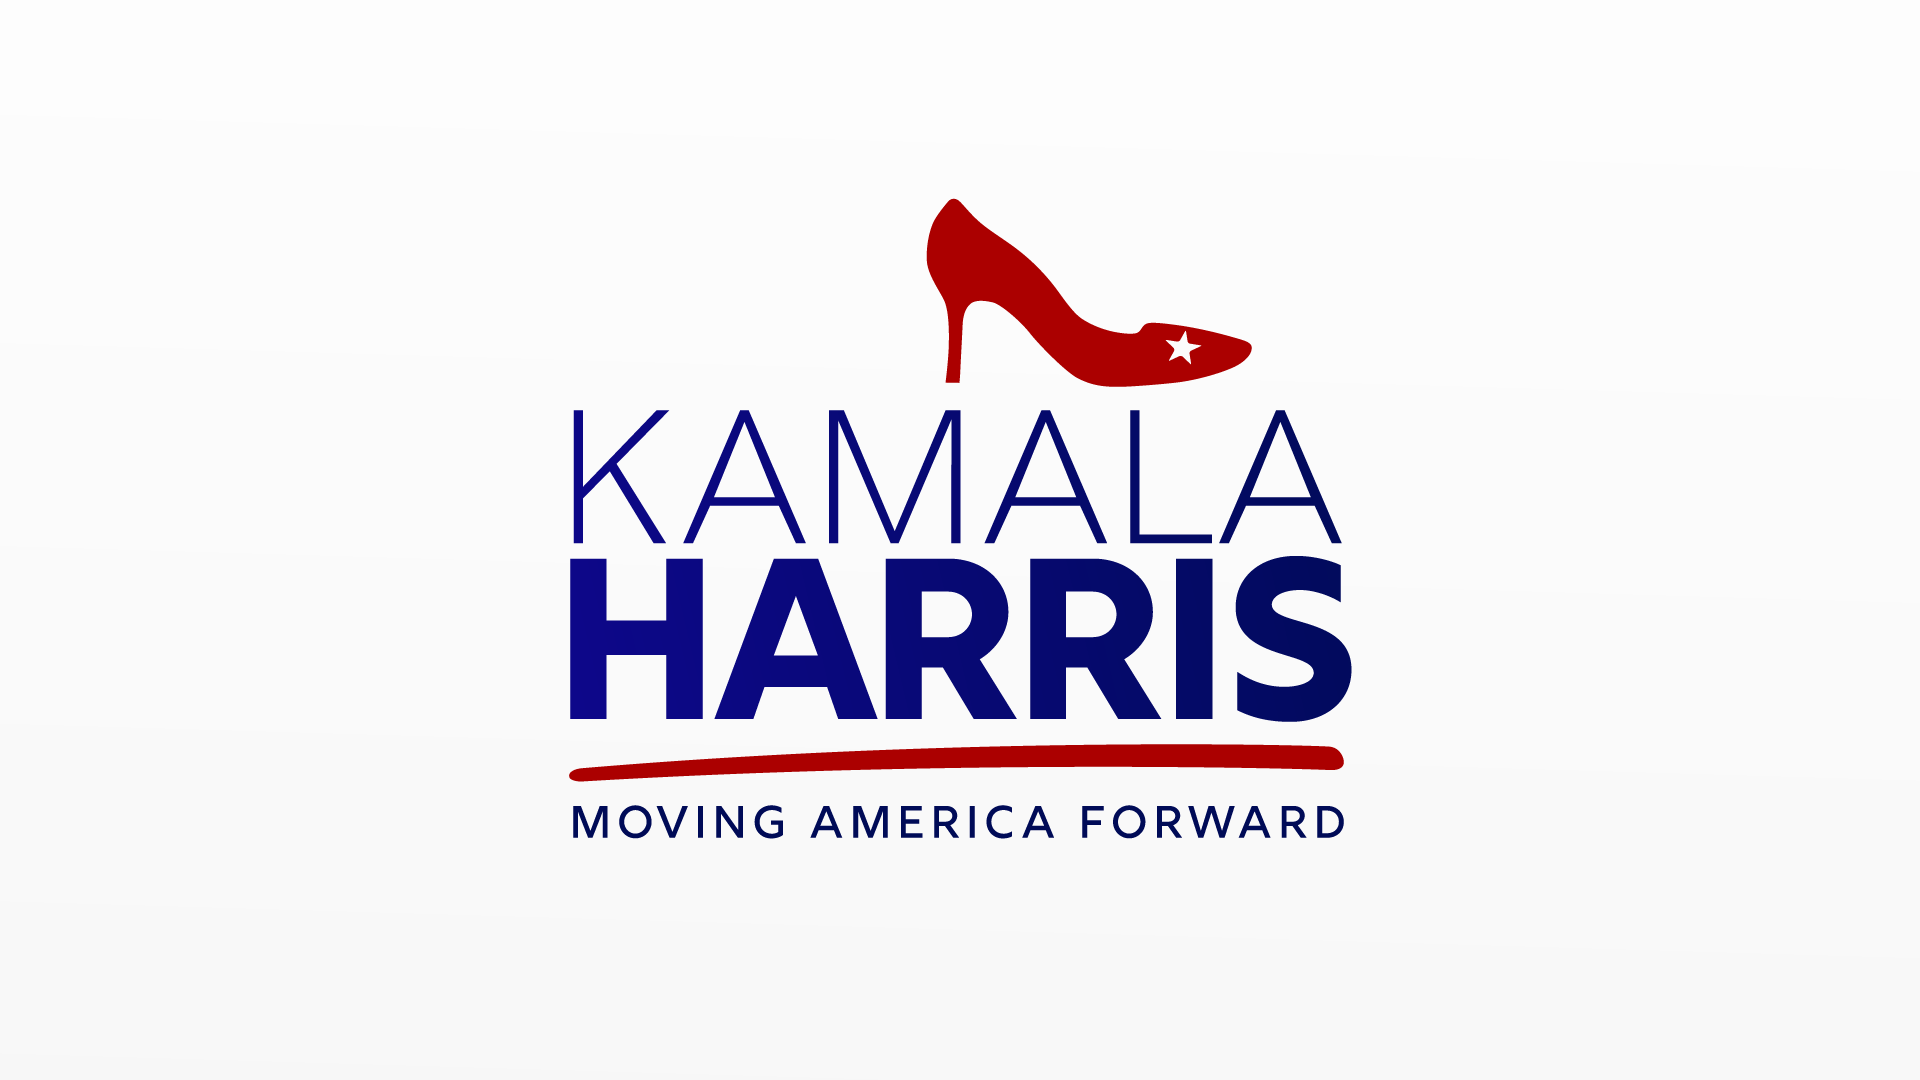 Kamala Harris graphic of Red High Heel with Star and slogan: Moving America Forward